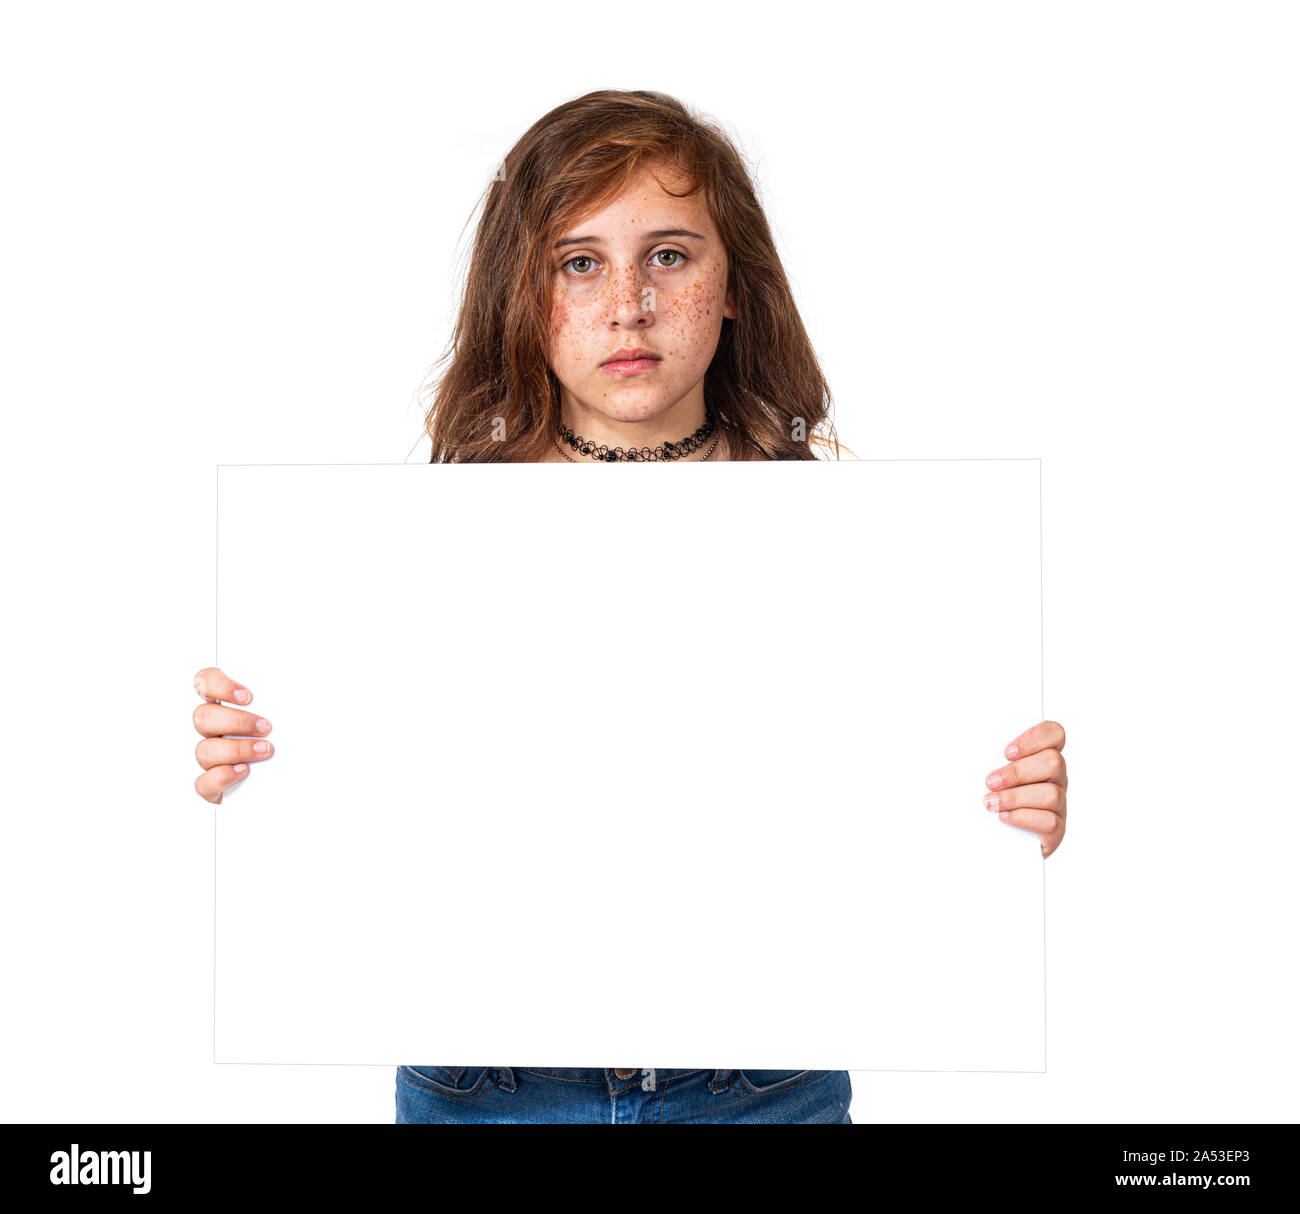 Horizontal studio shot of a serious looking pre-teen girl with freckles holding a blank white sign.  White background.  Copy space. Stock Photo